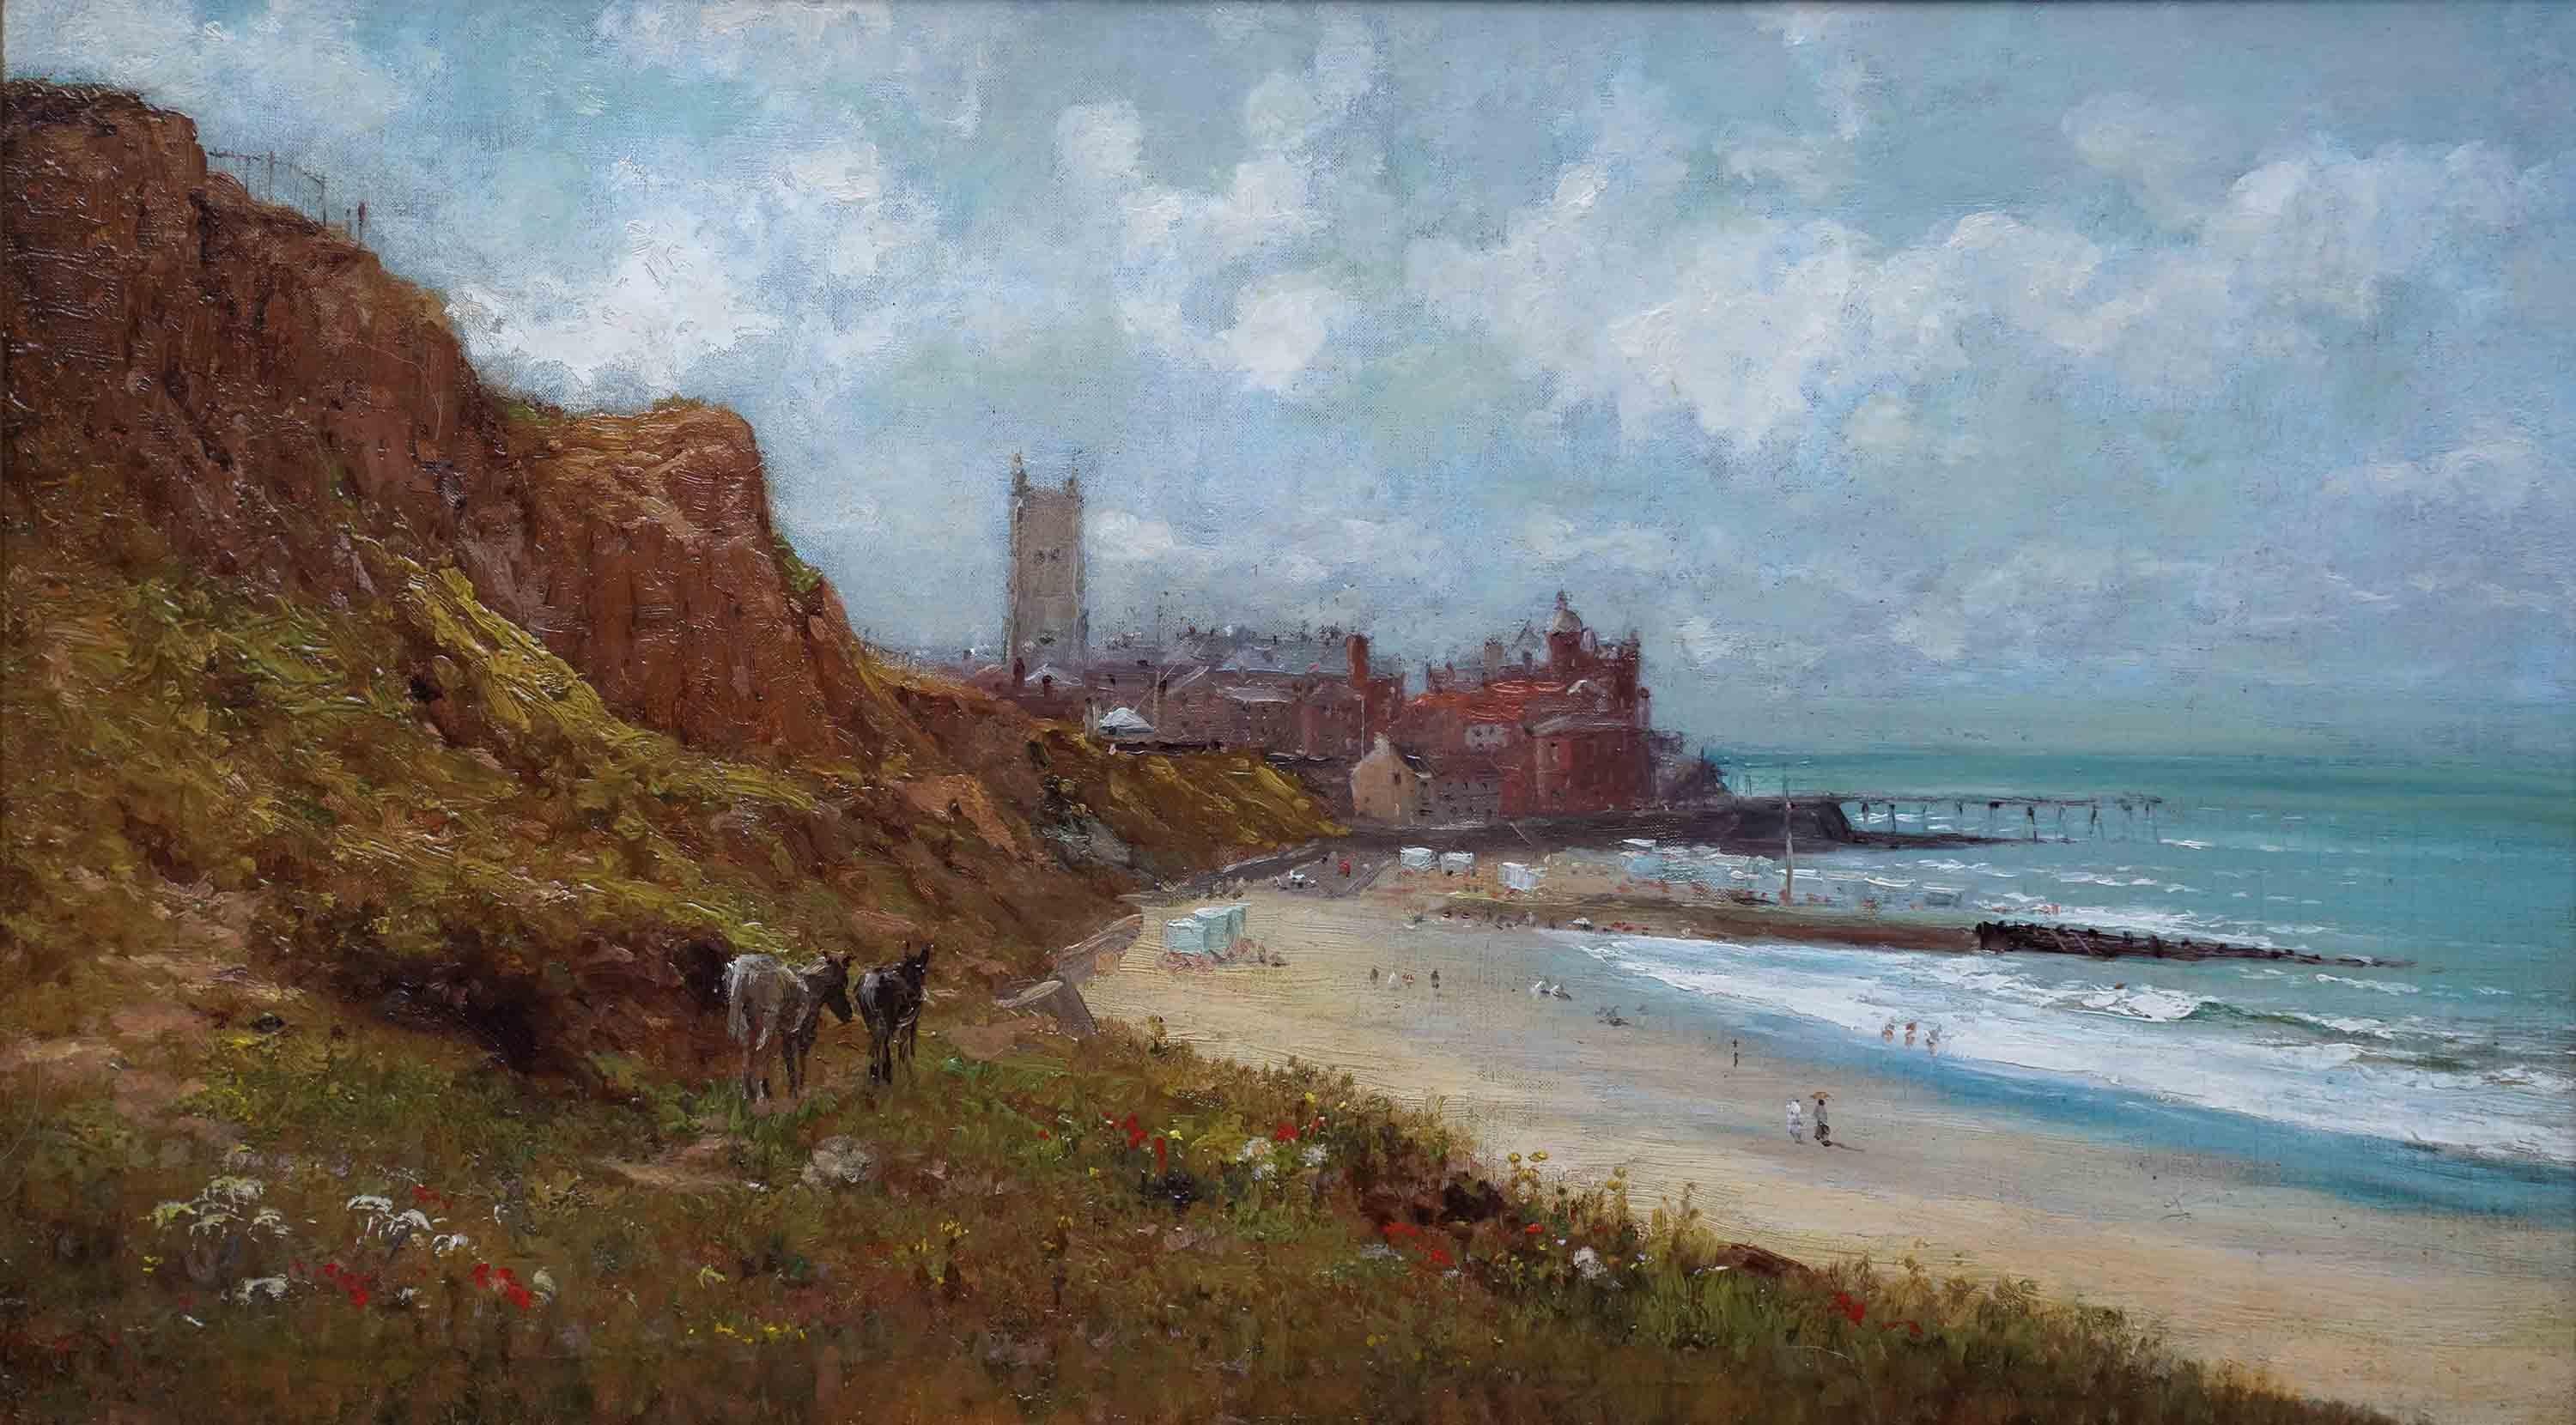 Cromer Coastal Landscape with Donkeys - British 19th century art oil painting For Sale 7